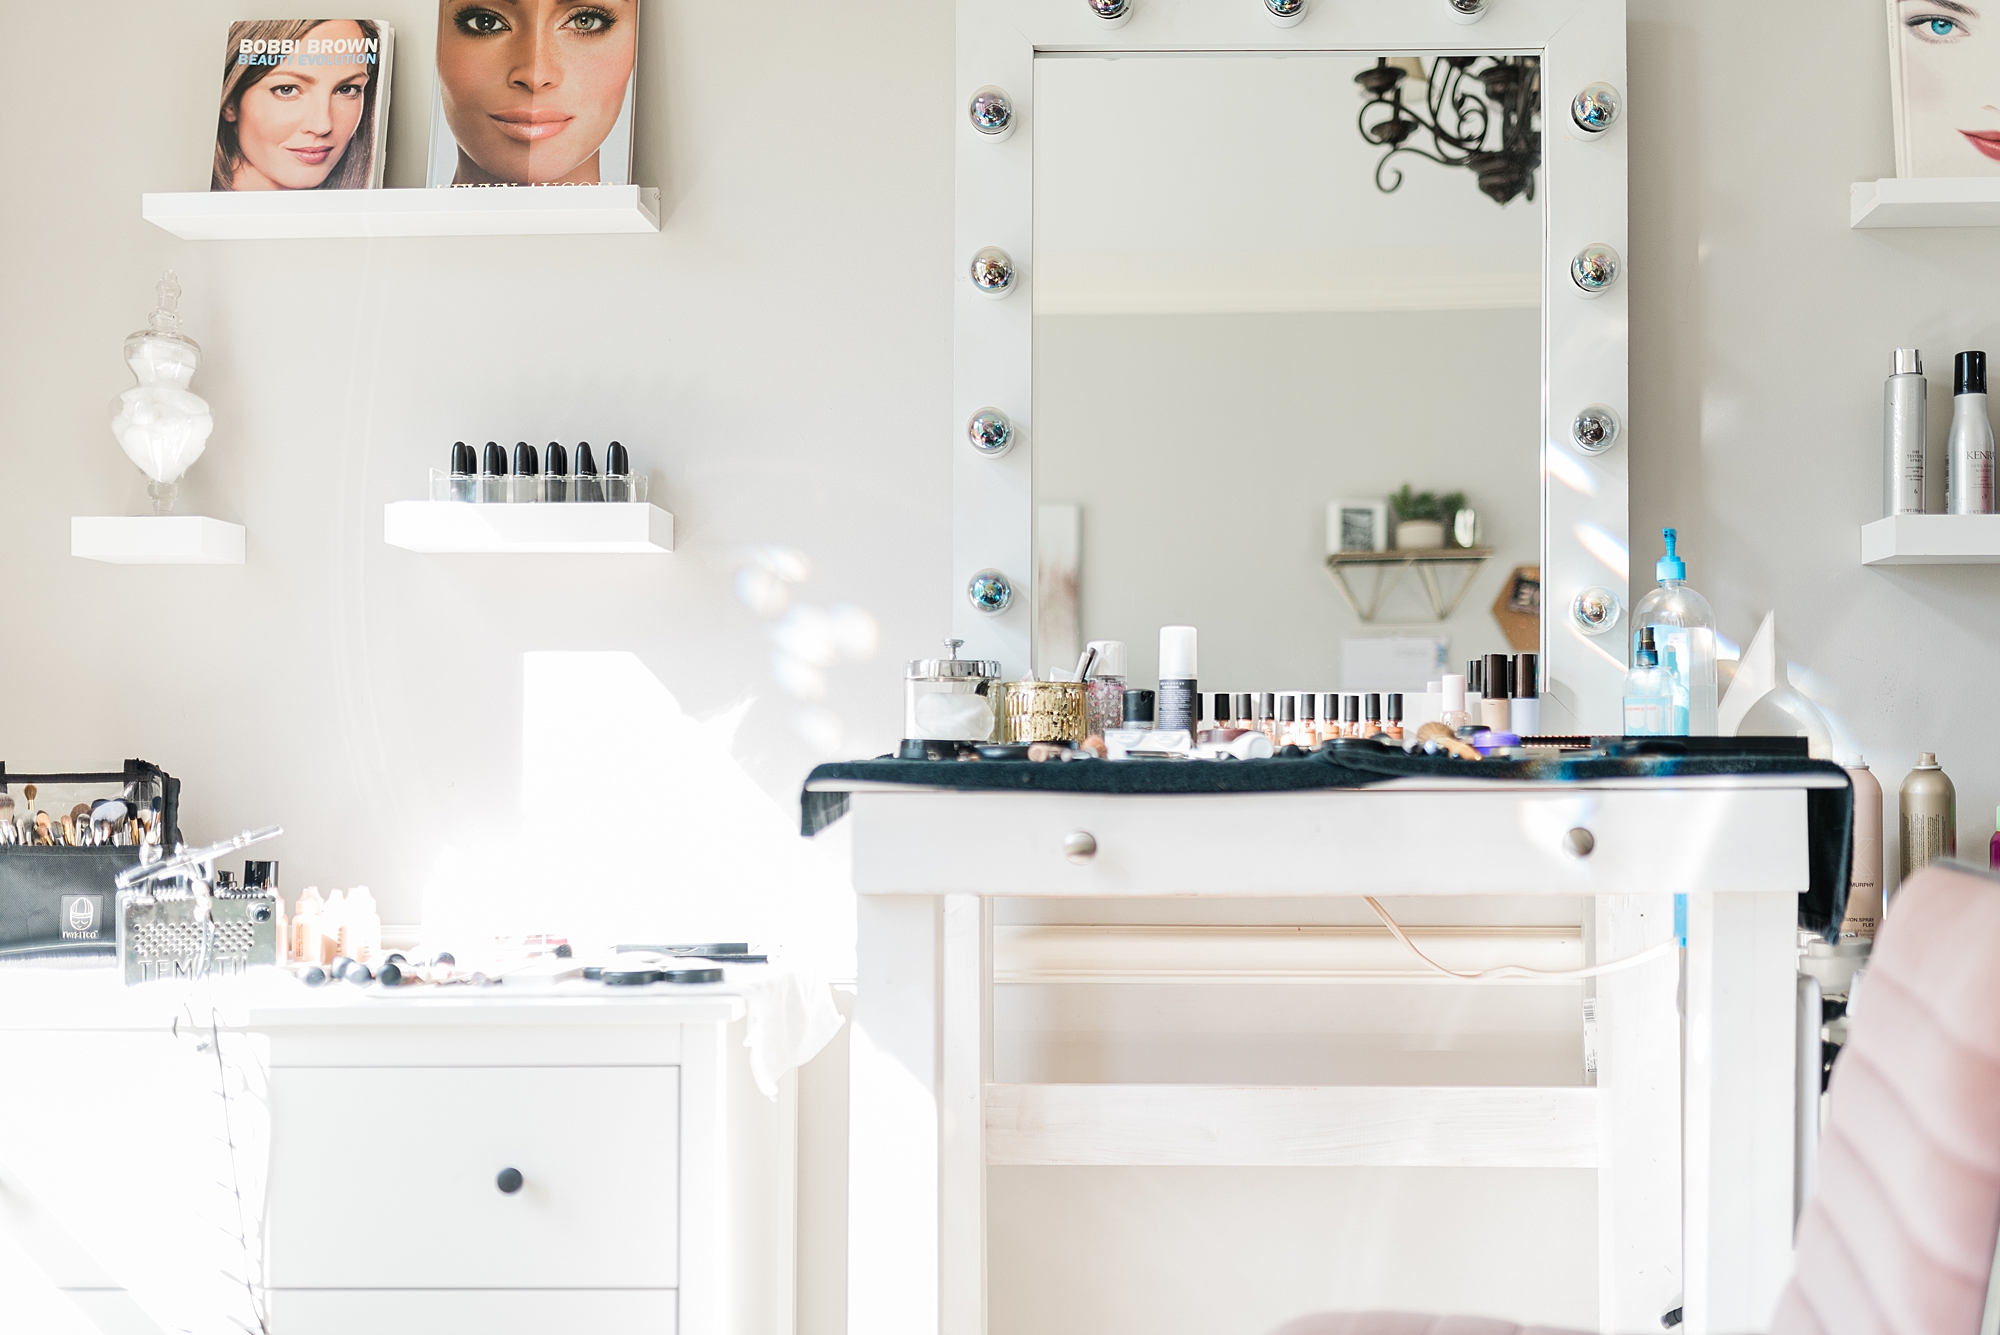 Nashville-hair-and-makeup-artist-kati-edge-hair-and-makeup-for-her-branding-photos-in-her-home-studio